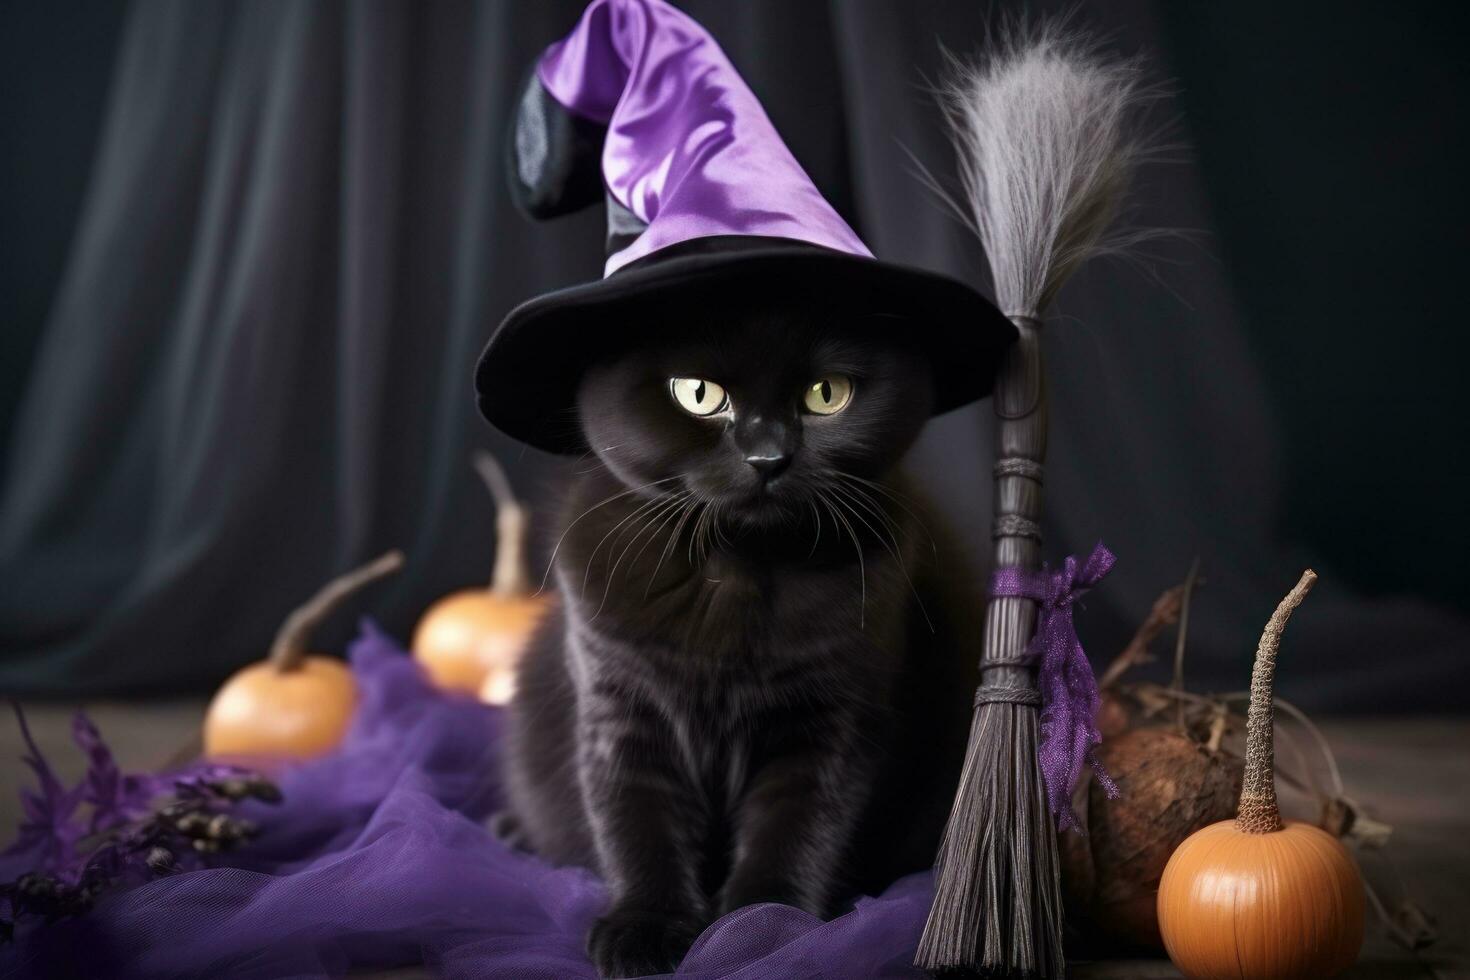 Black cat in a purple hat sits on a broomstick - photo